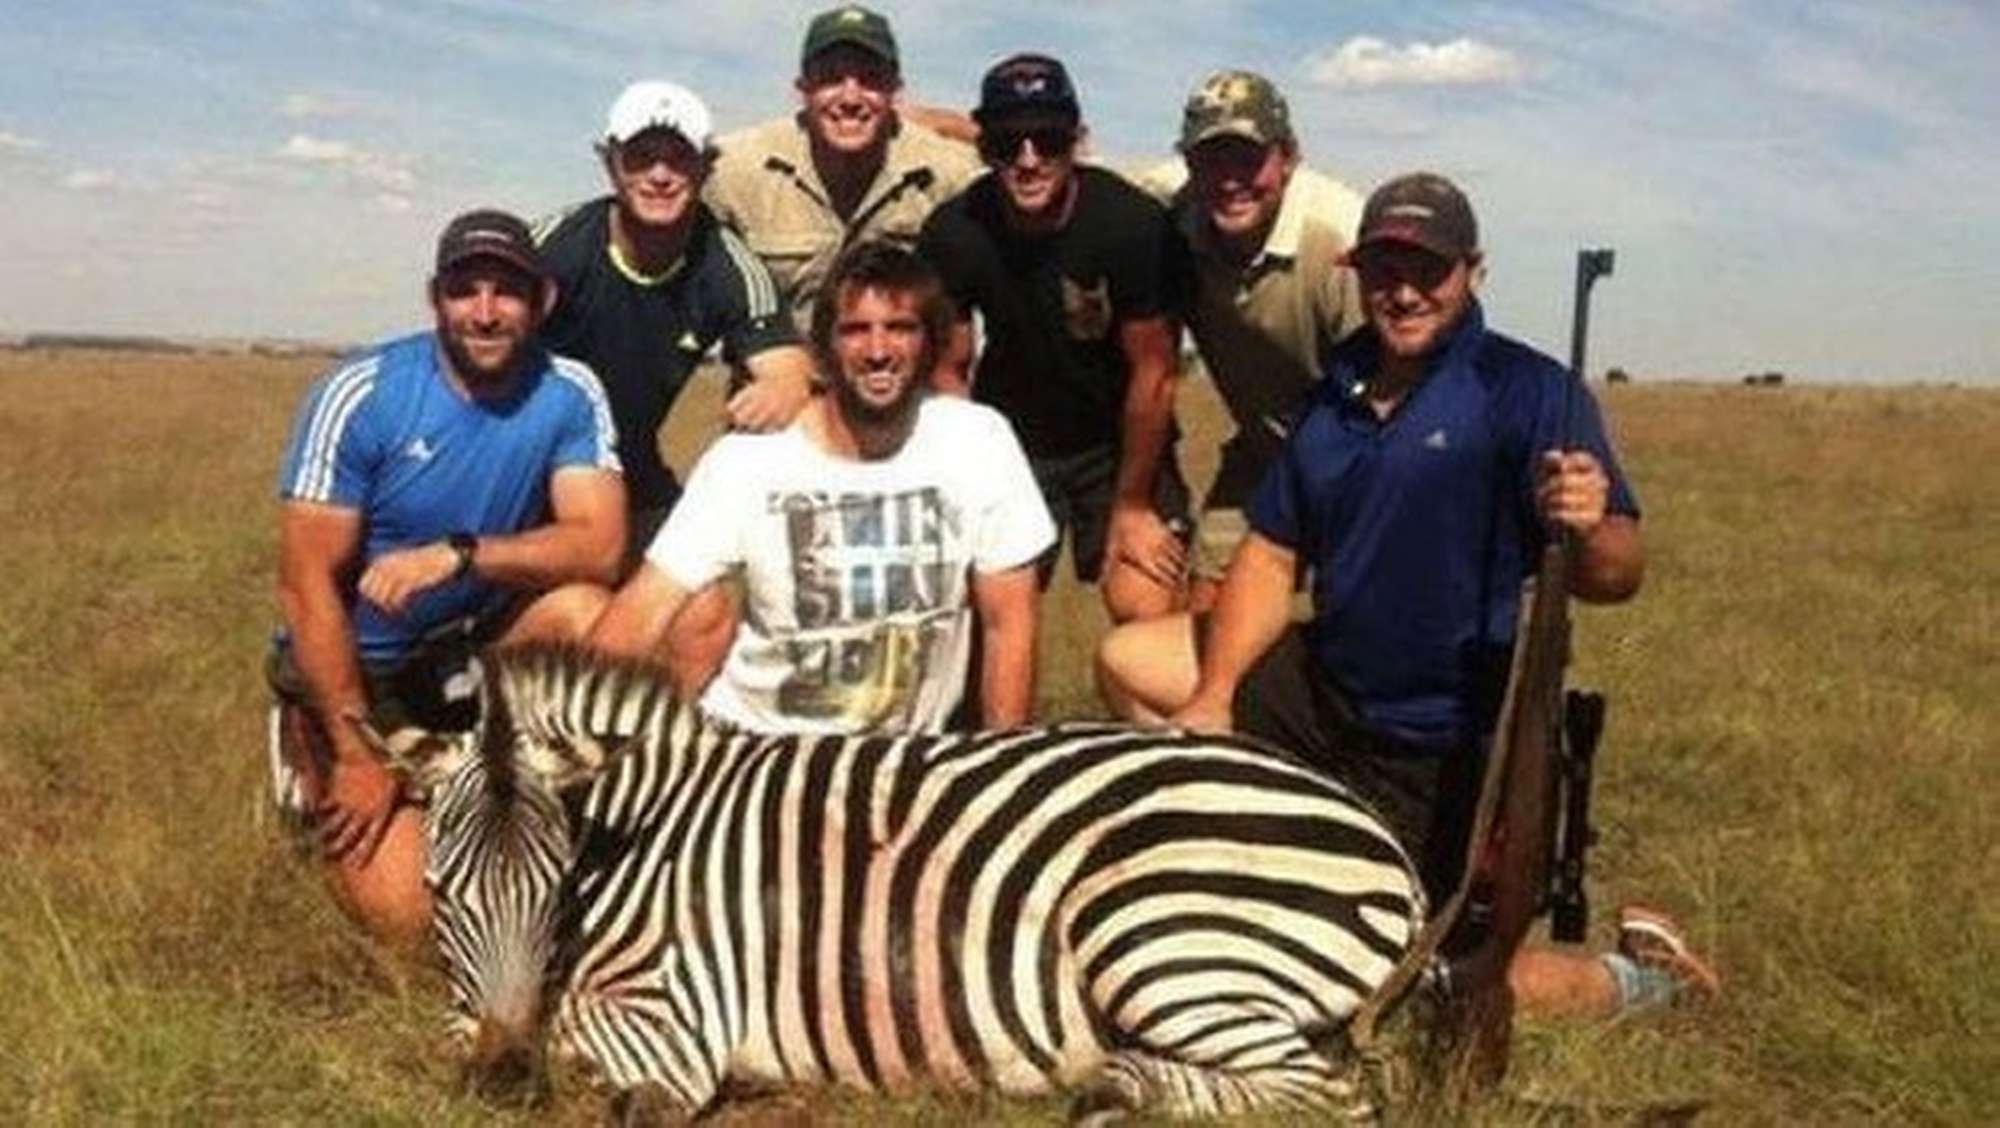 Crusaders players George Whitelock, Tyler Bleyendaal, Sam Whitelock, Tom Taylor and Ben Funnell with guides on a hunting trip in South Africa. Photo: SCMP Pictures
